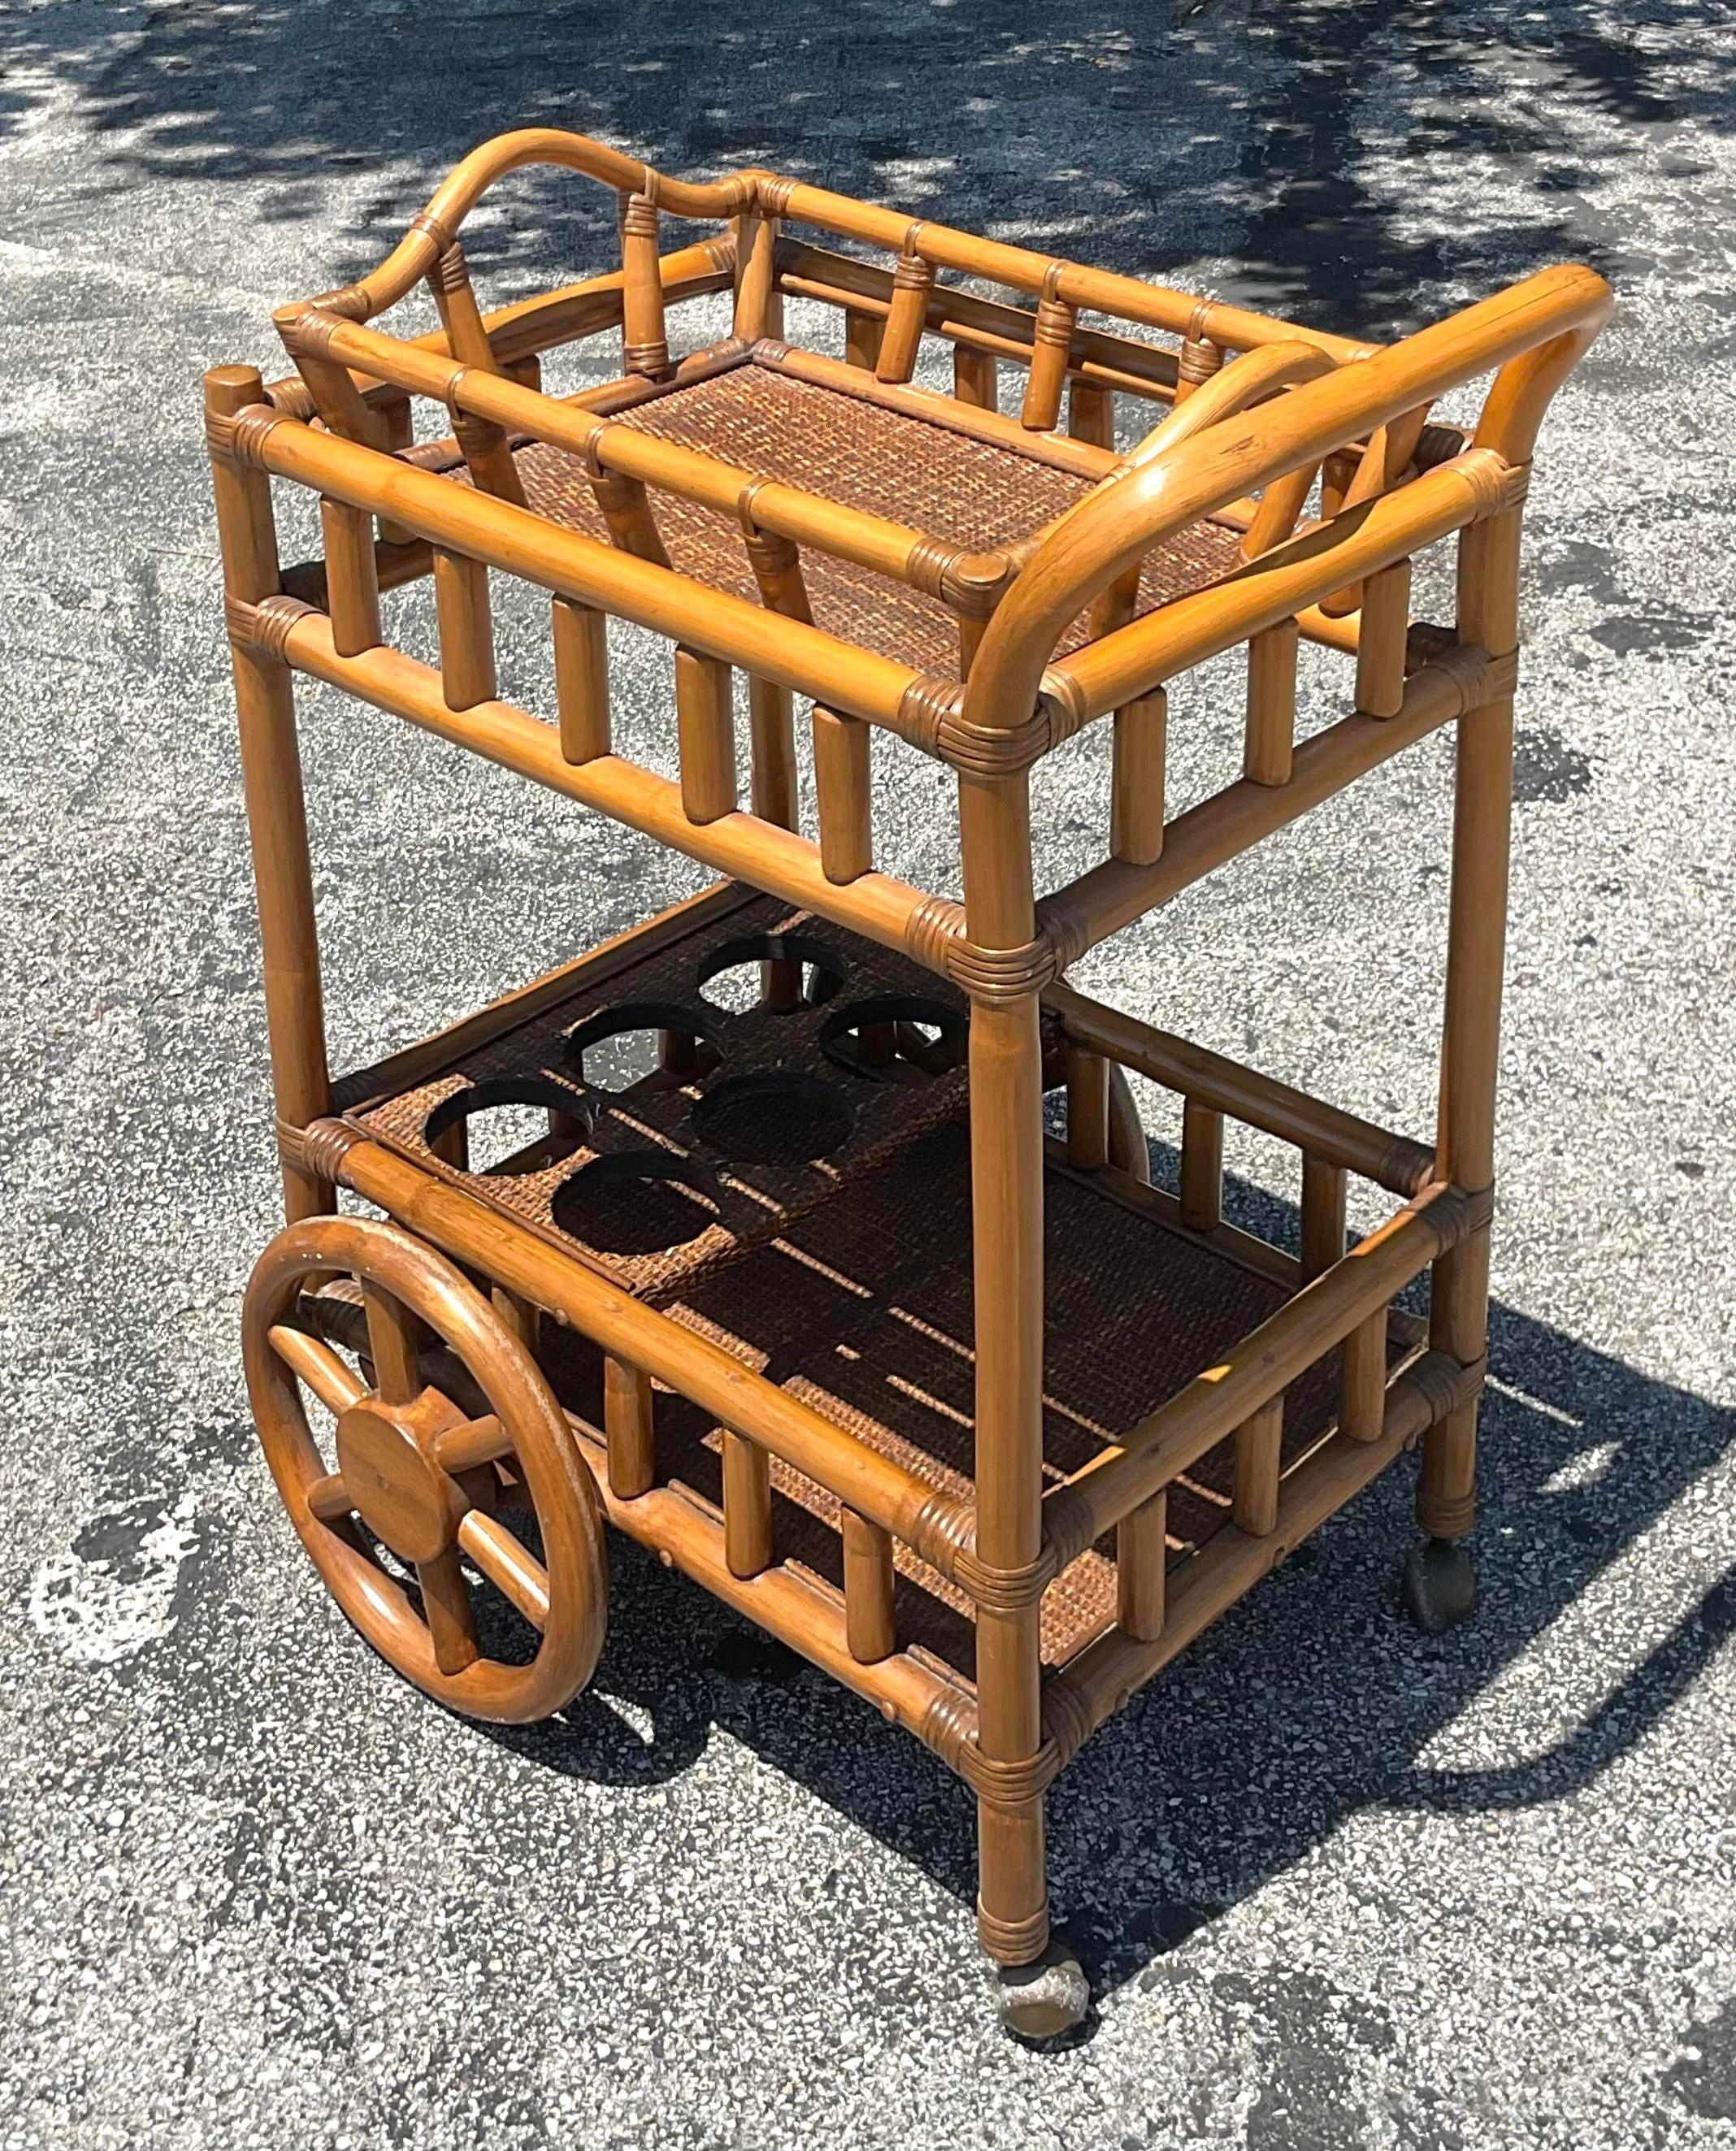 Serve up seaside vibes with our Vintage Coastal Rattan Bar Cart. Crafted with natural rattan, this bar cart exudes coastal charm and functionality. A stylish addition that effortlessly combines American practicality with coastal elegance for your